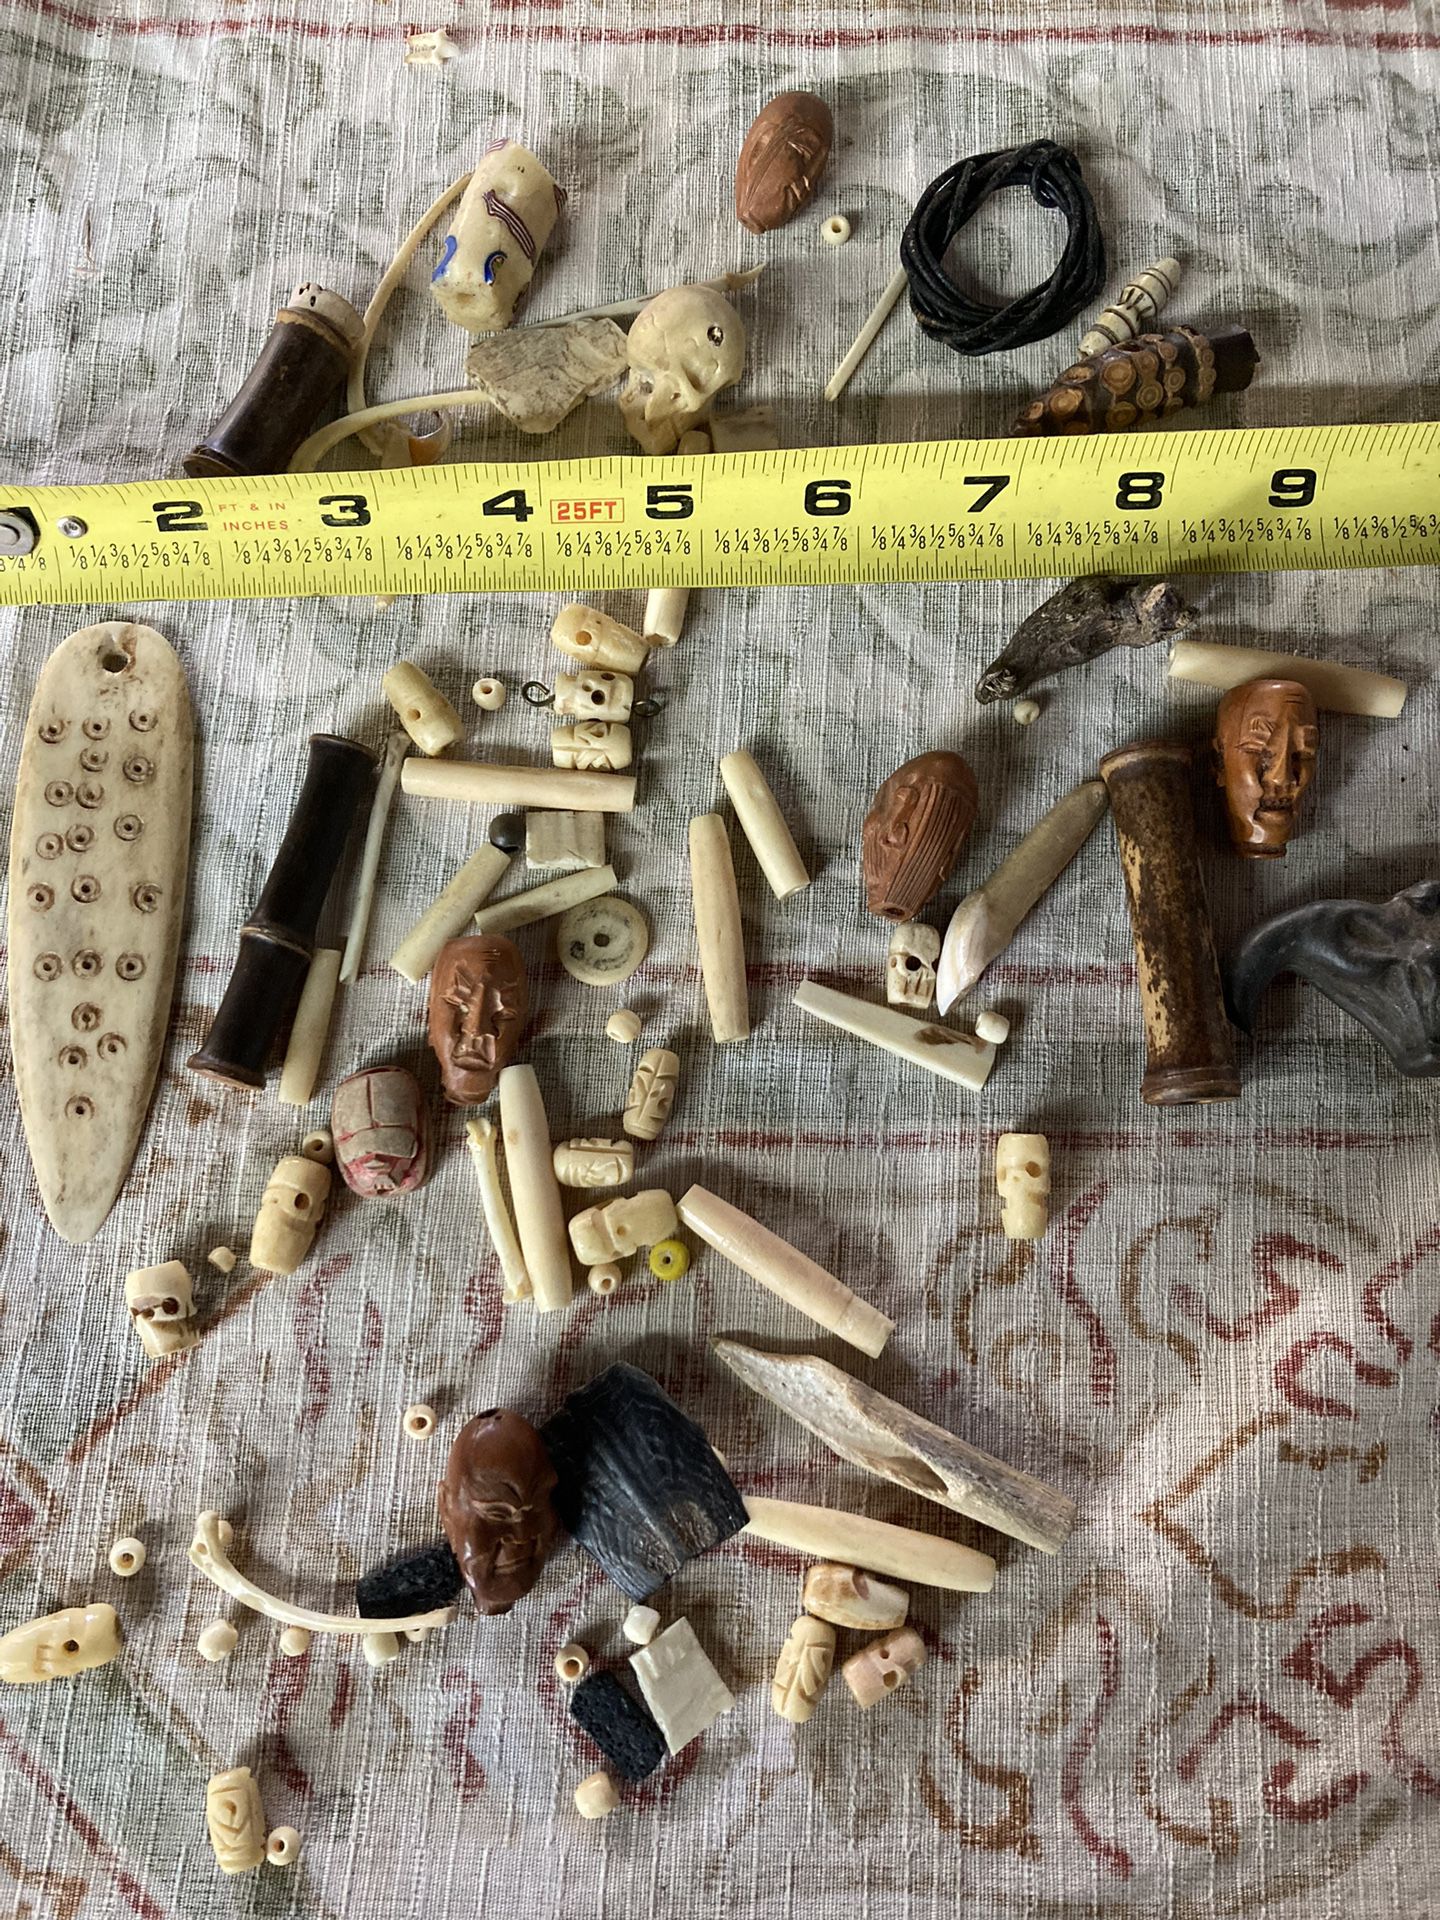 Wood , Bone, Ivory Pieces Skull Face Nails Bones For Necklace Or Art Project Halloween decoration   Random assortment of Wood , Bone, Ivory Pieces.  E